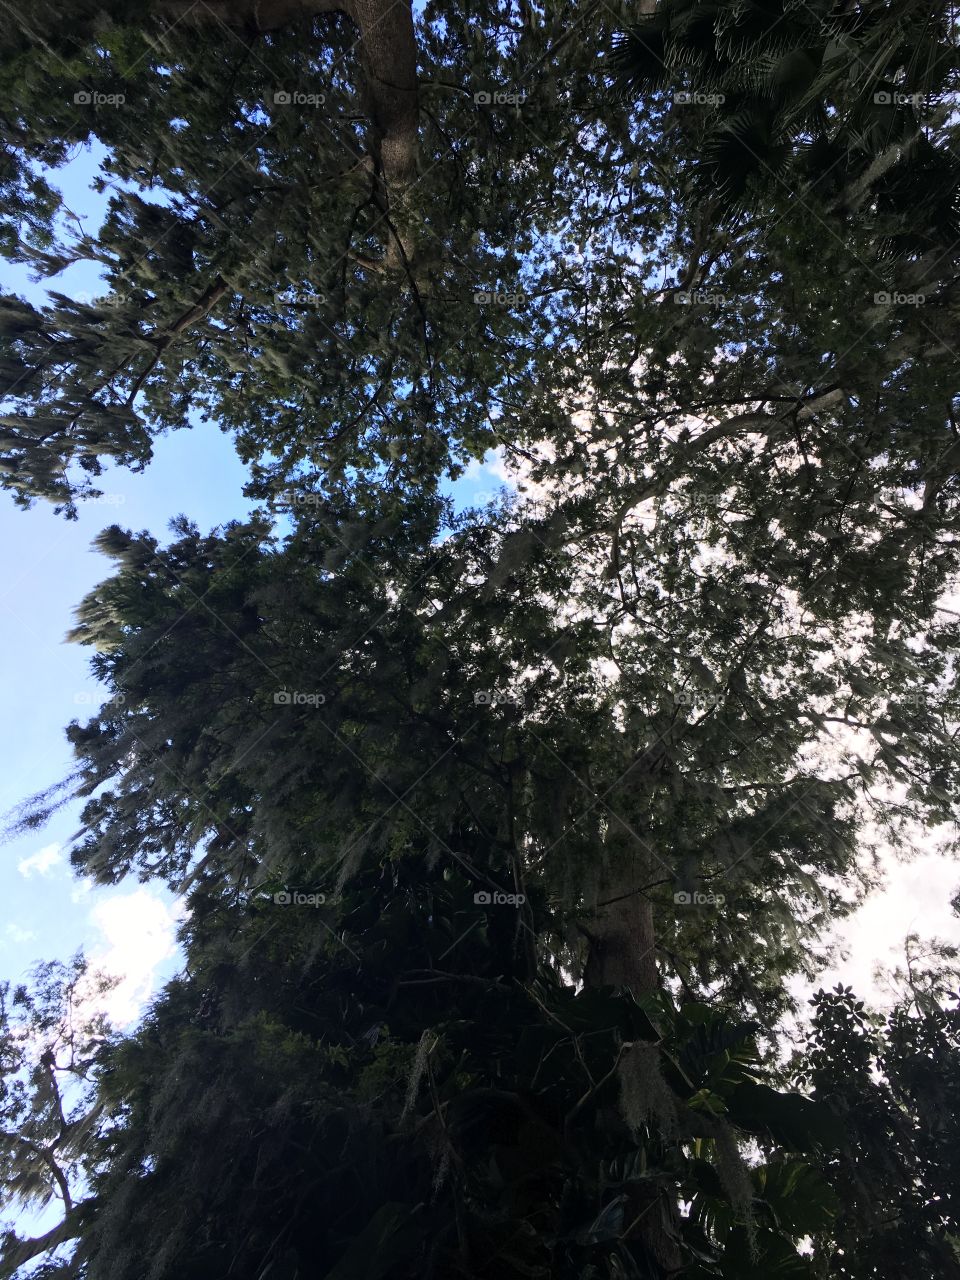 Trees located in Winter Park, Florida.